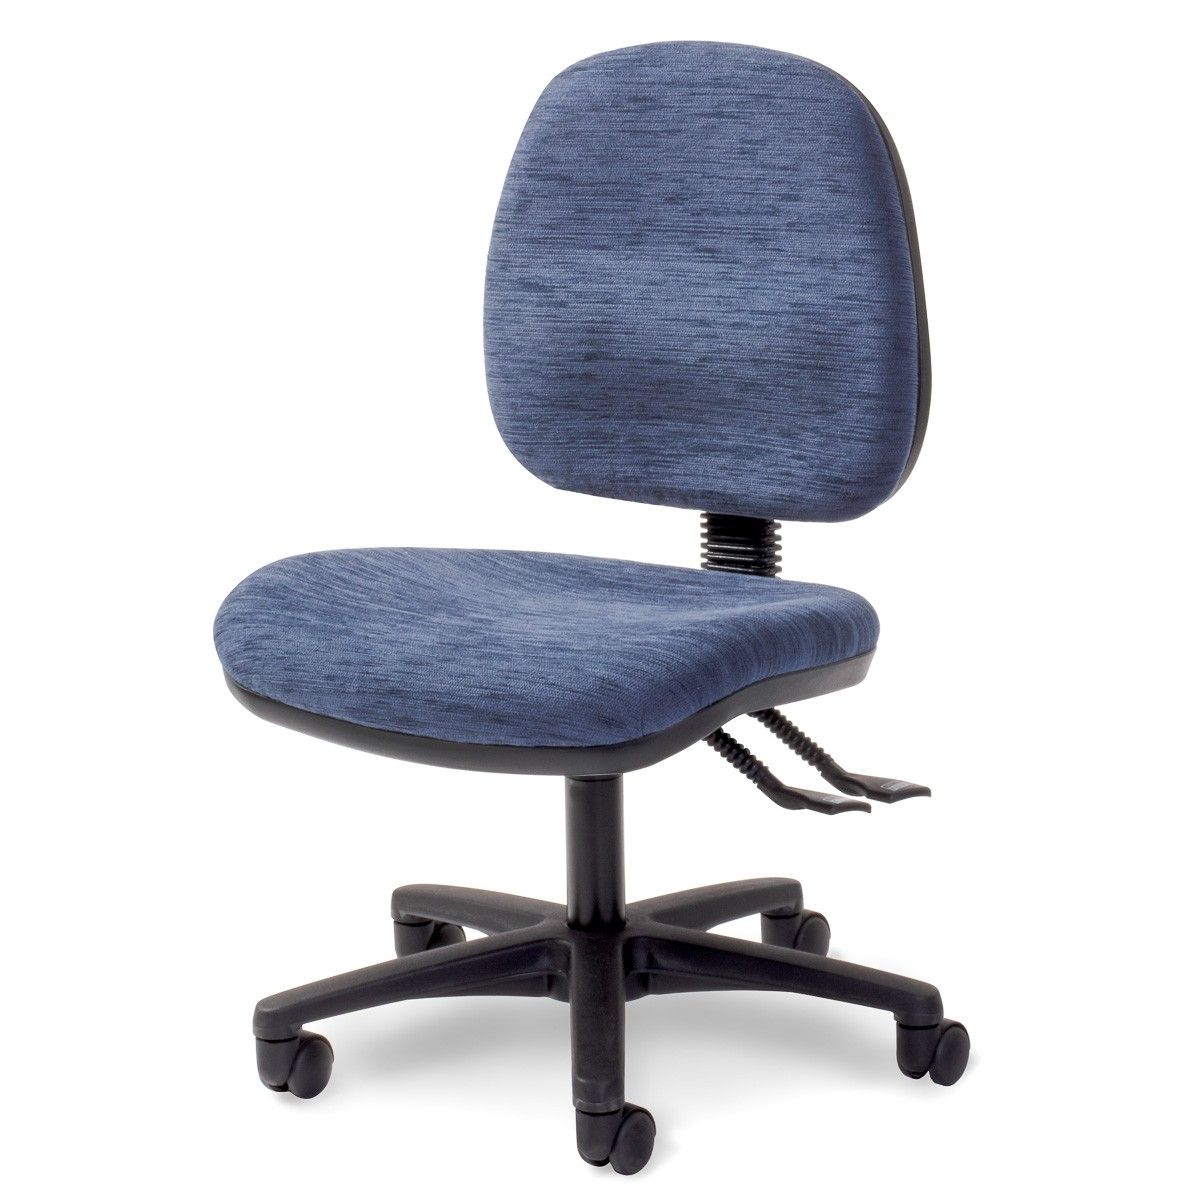 Aspen: Mid Back Office Furniture, Desk Chairs, Task Seating With Regard To Most Up To Date Aspen Swivel Chairs (View 17 of 20)